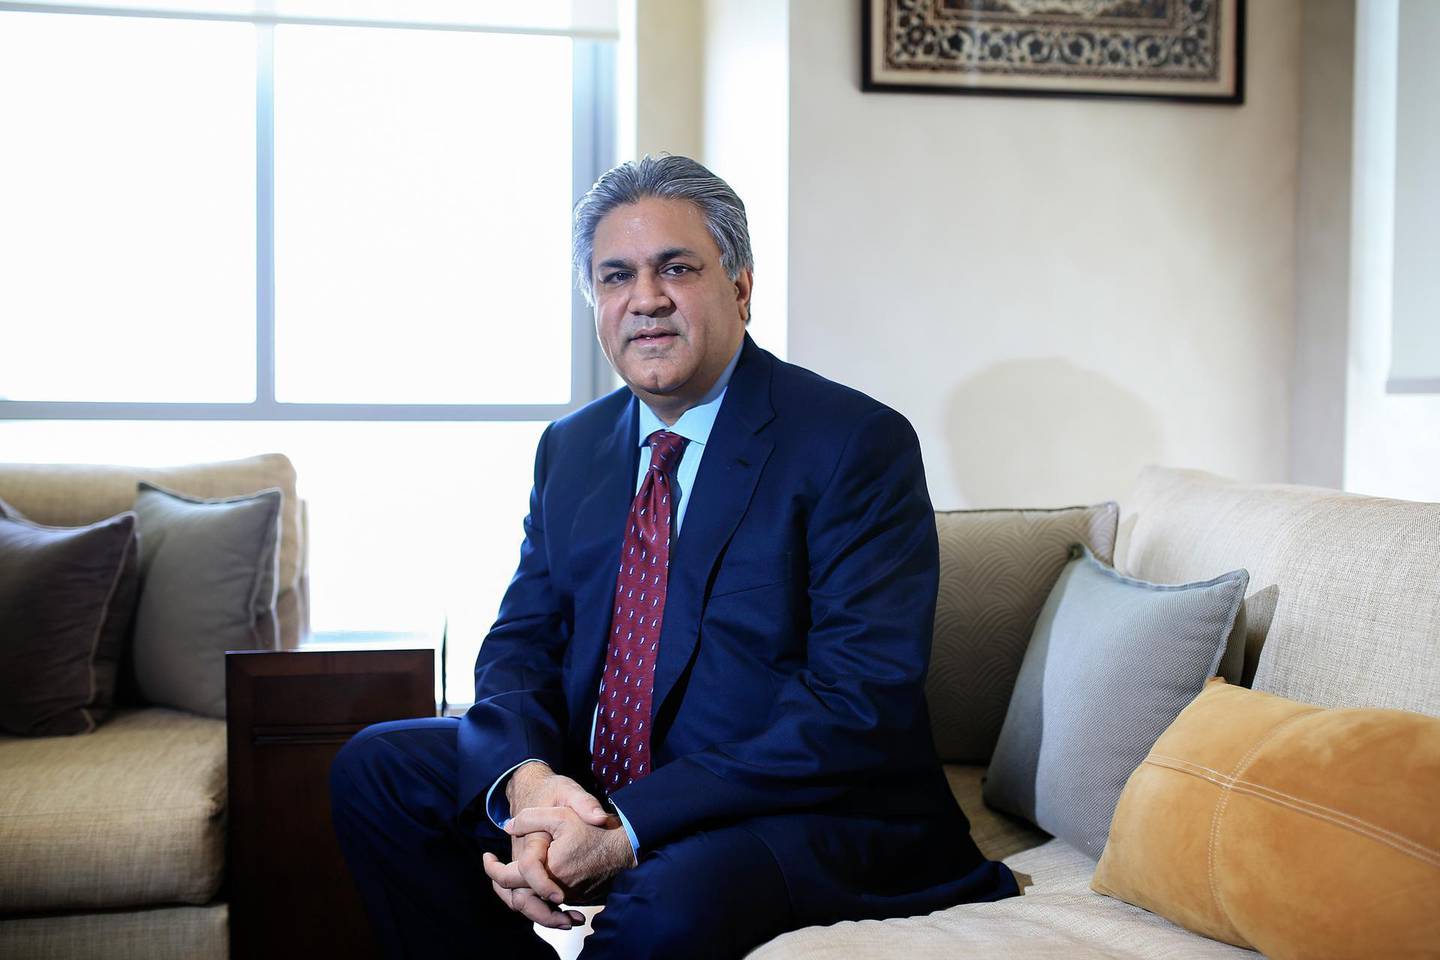 DUBAI, UAE. May 4, 2014 -  Arif Naqvi, CEO of Abraaj Capital, is photographed in his DIFC office in Dubai, May 4, 2014. (Photos by: Sarah Dea/The National, Story by: Frank Kane, Business)